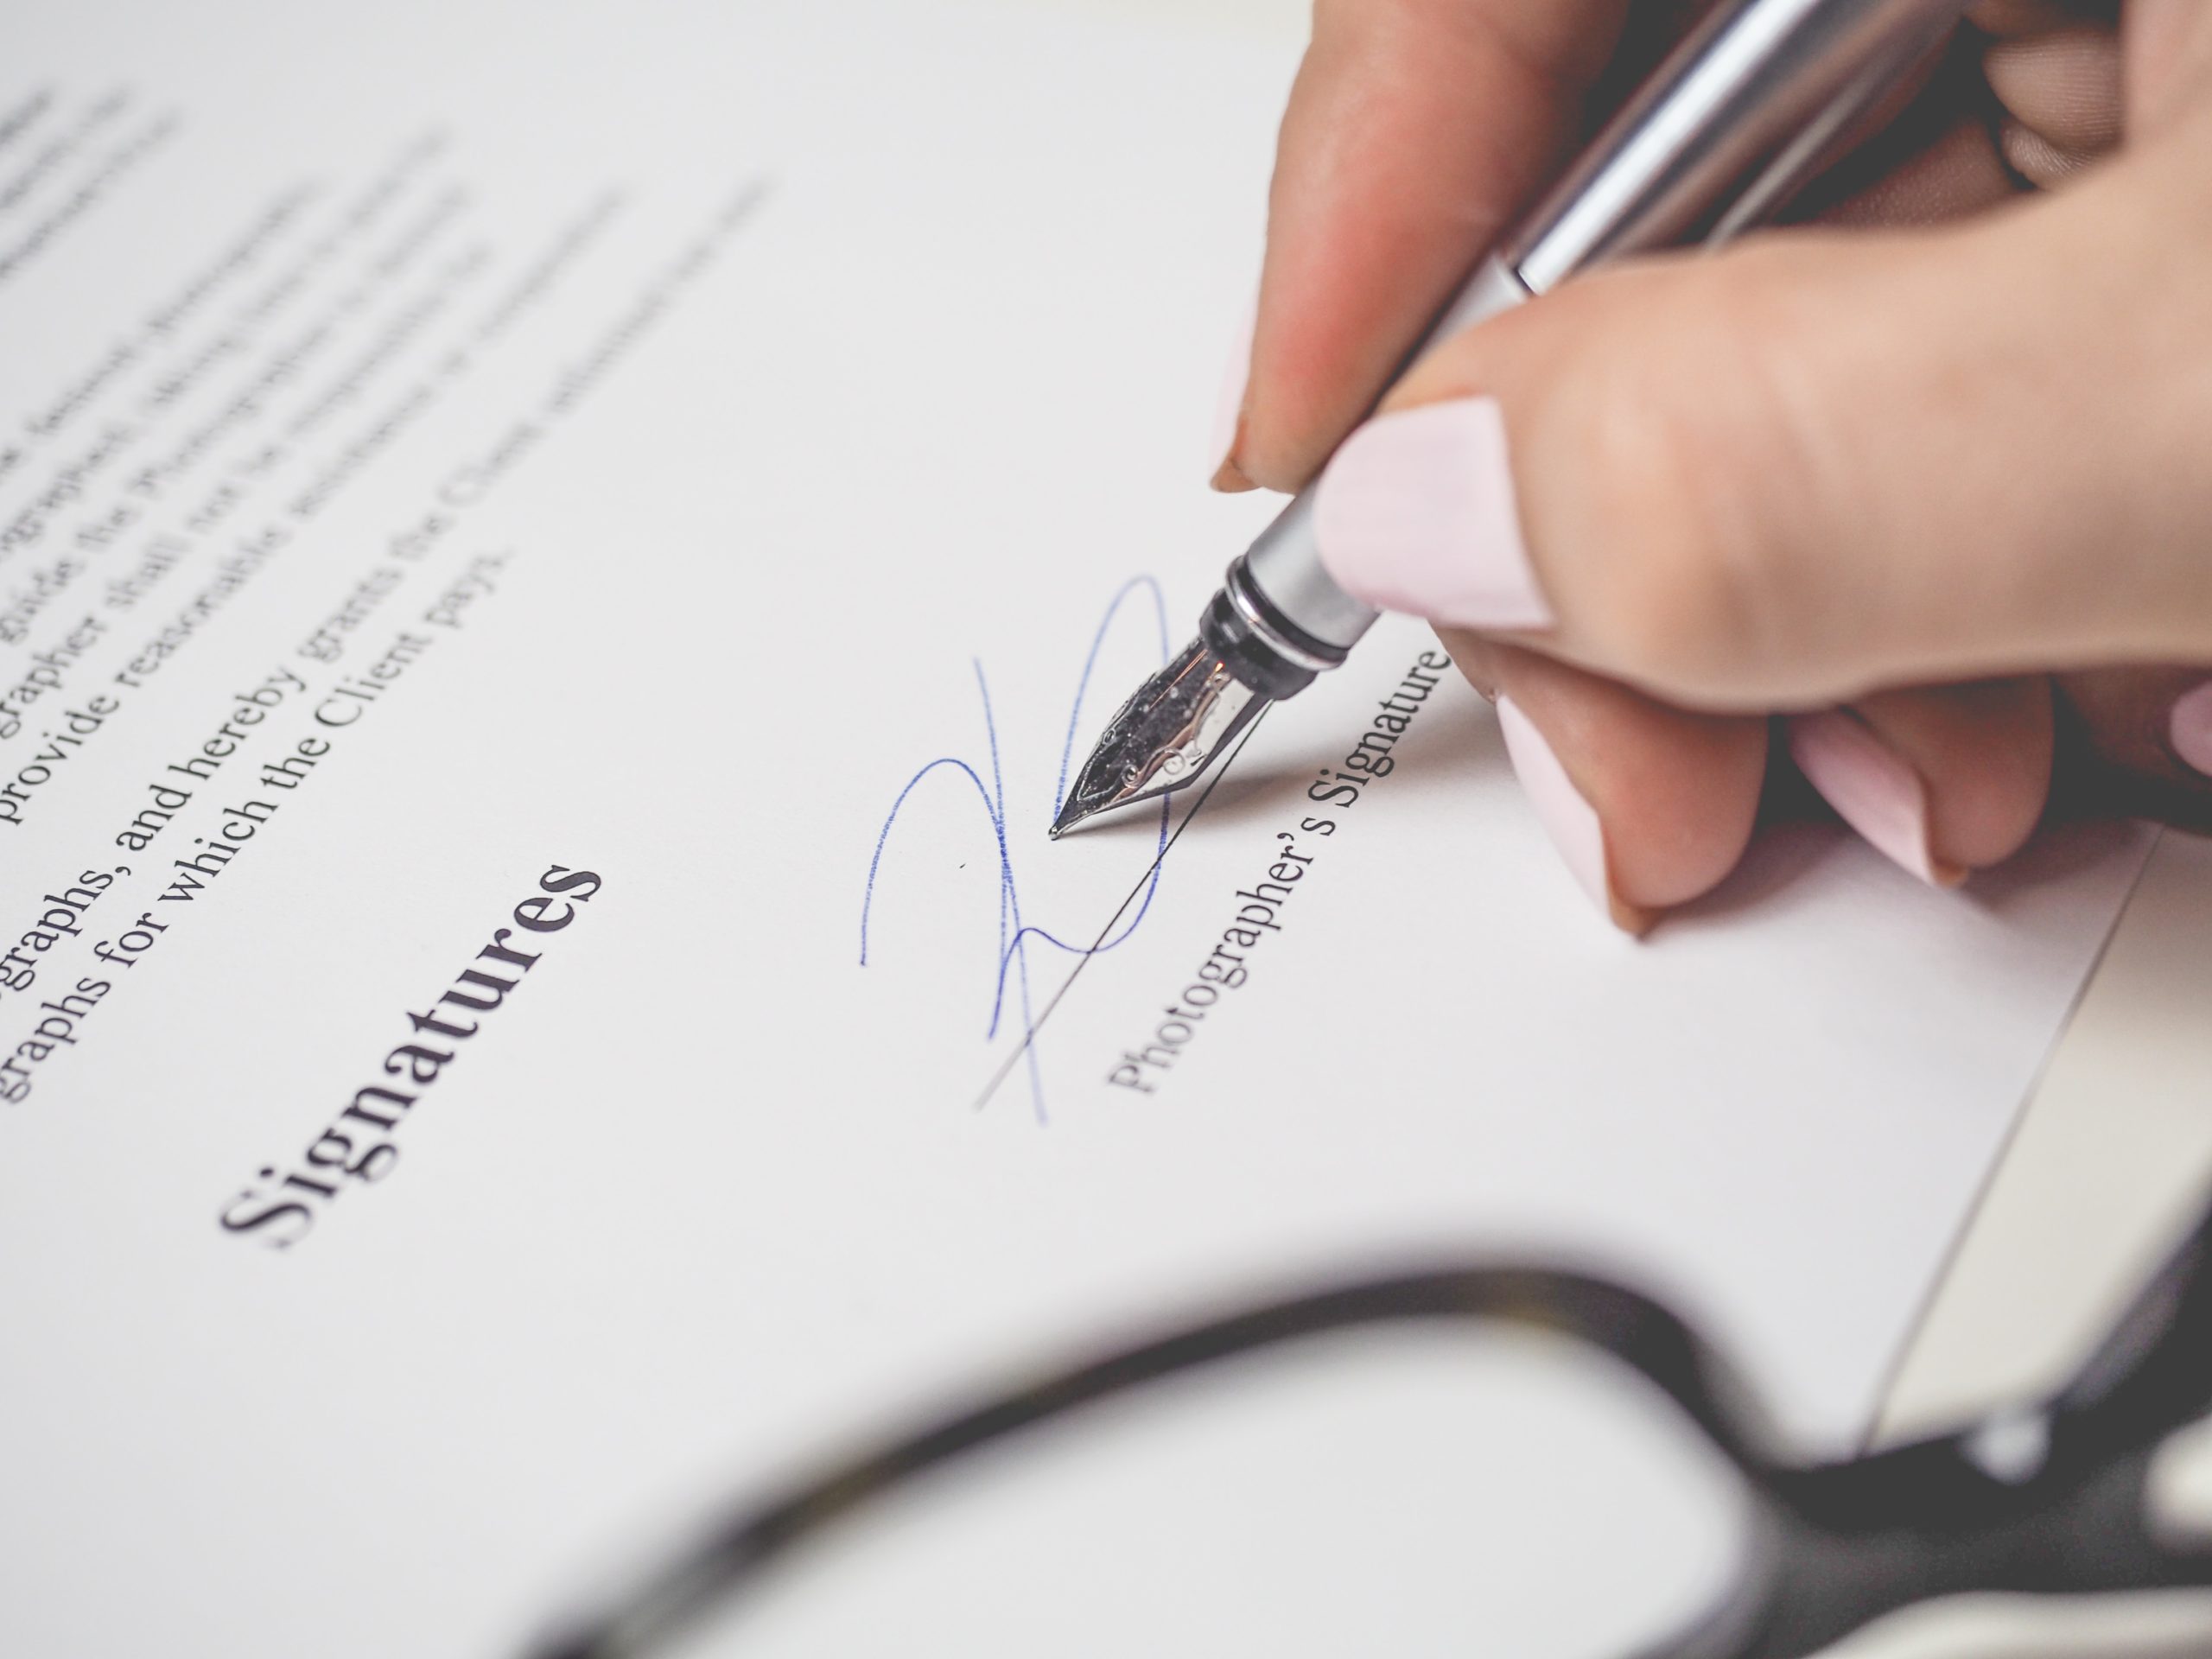 What Are The Elements Of An Enforceable Business Contract?